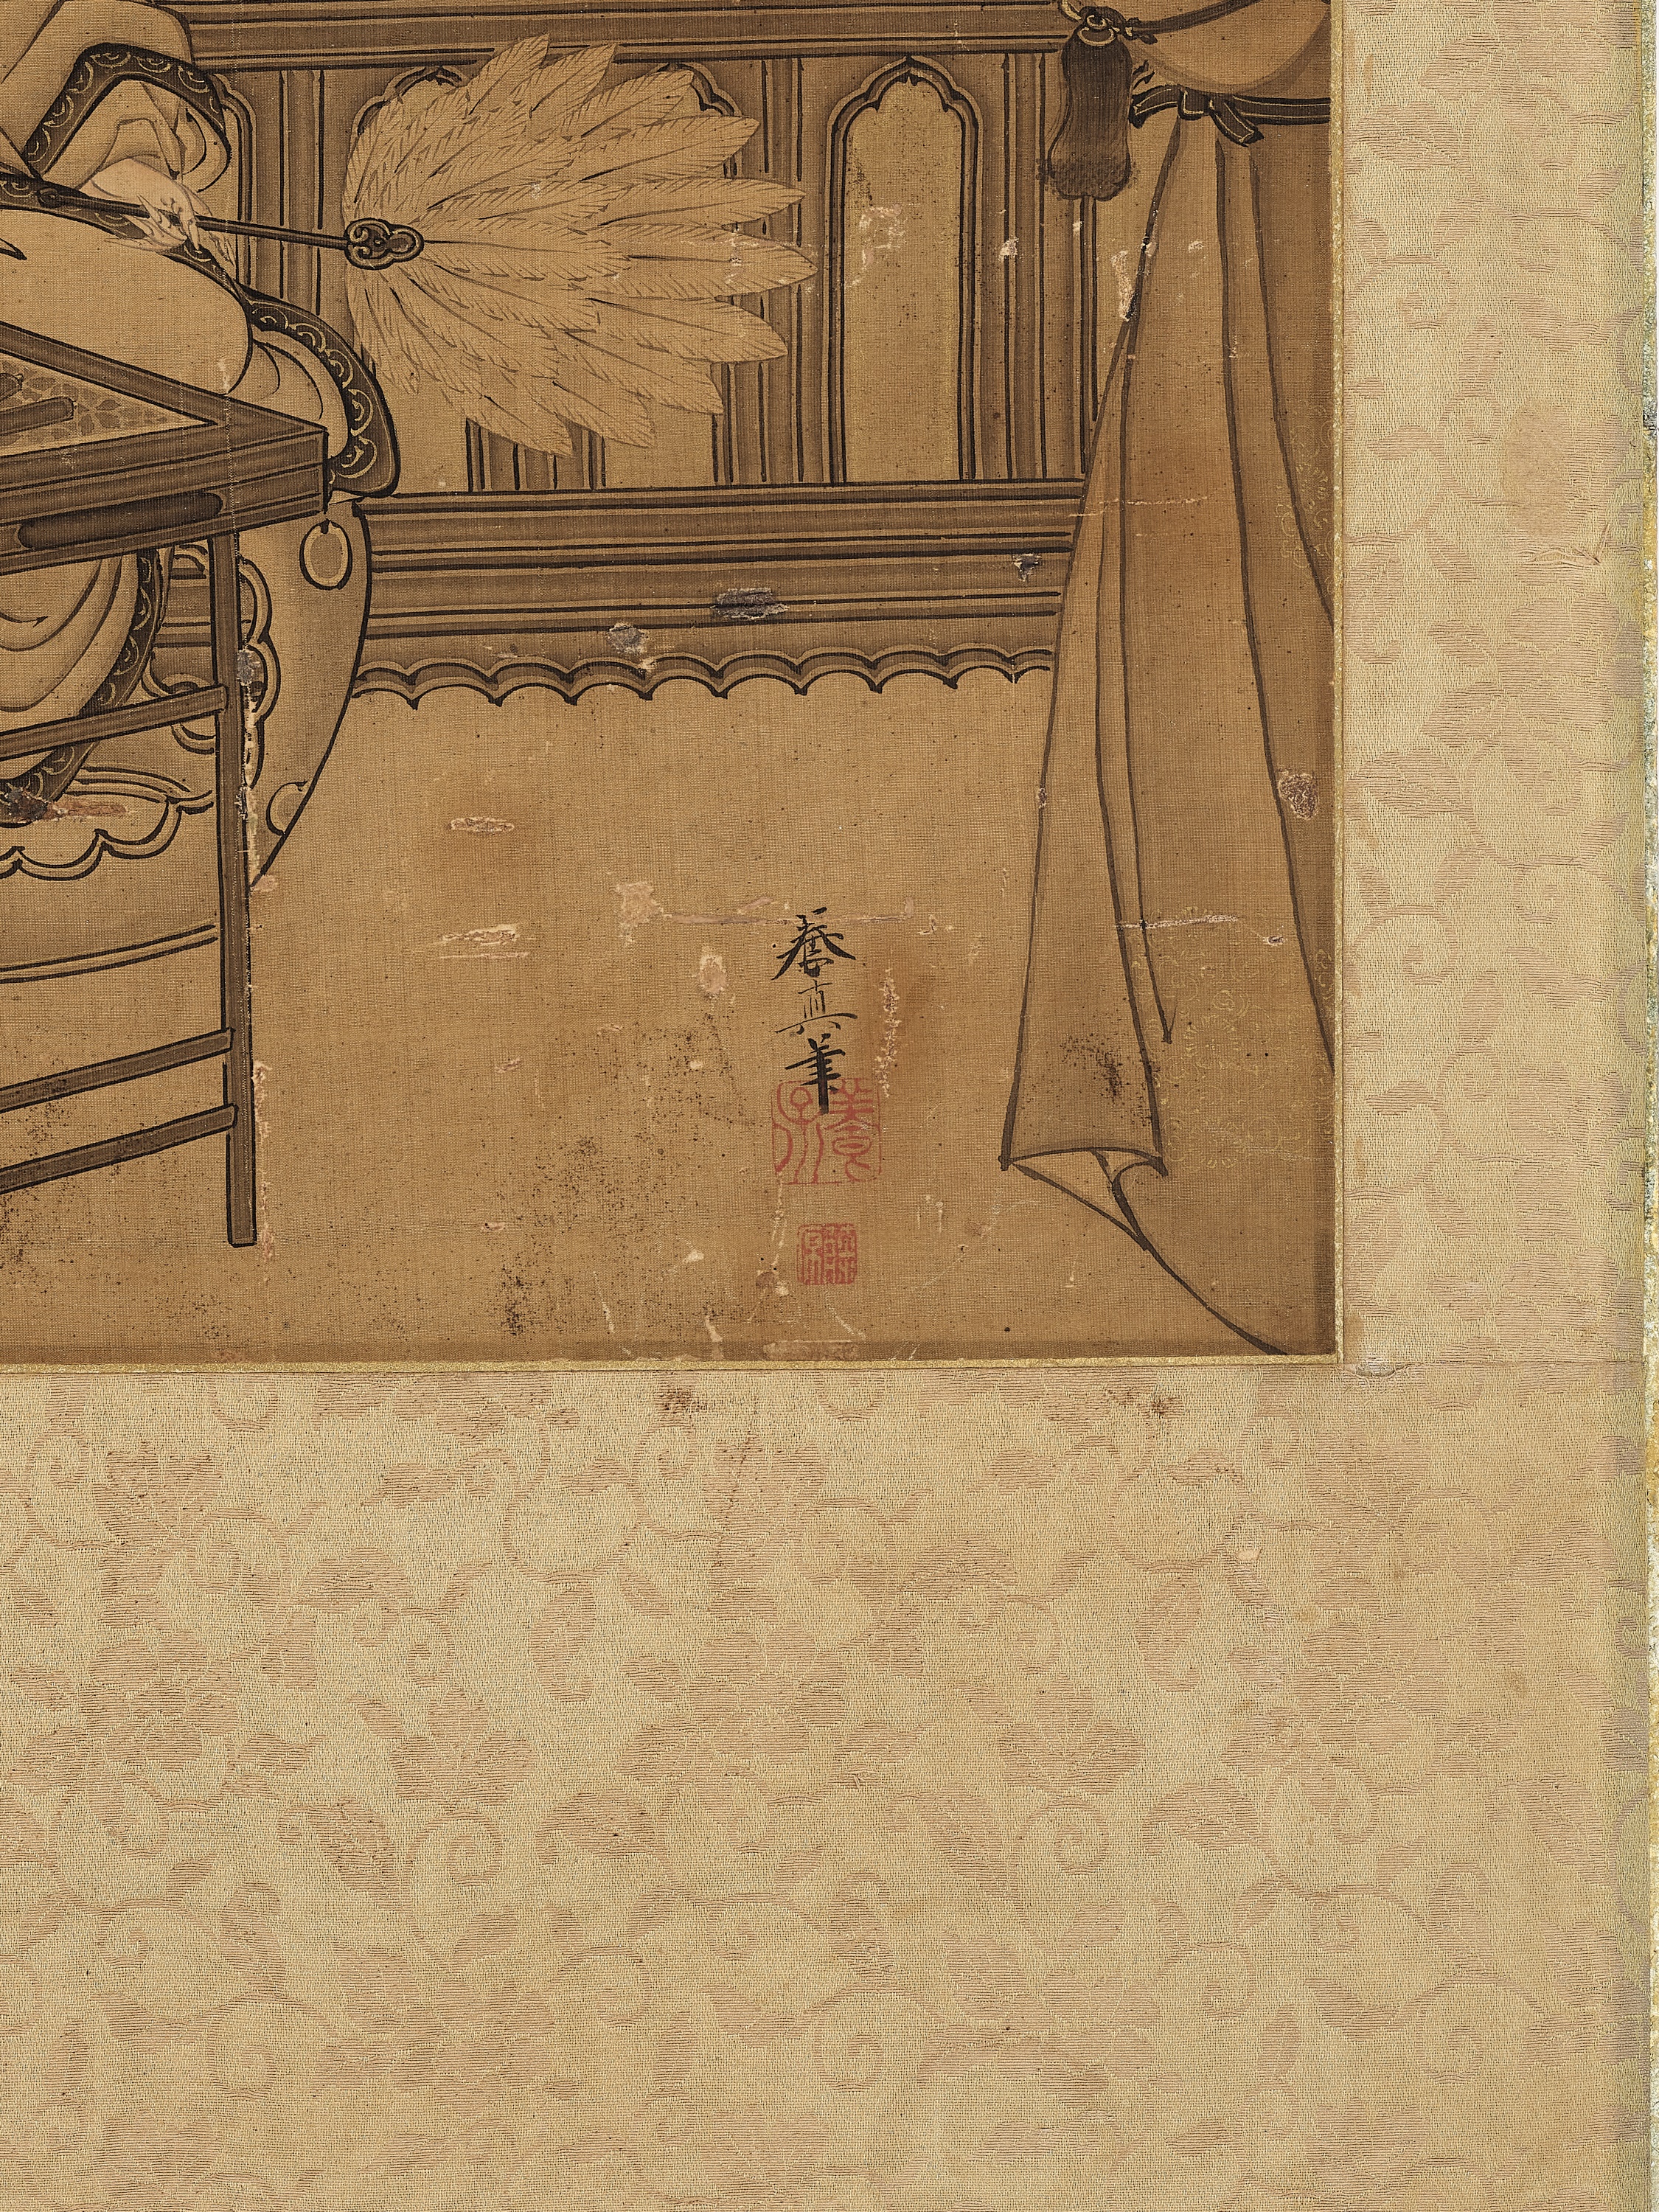 KOTO YOSHIN: A FINE KANO SCHOOL PAINTING OF 'SCHOLAR READING A SCROLL' - Image 5 of 8